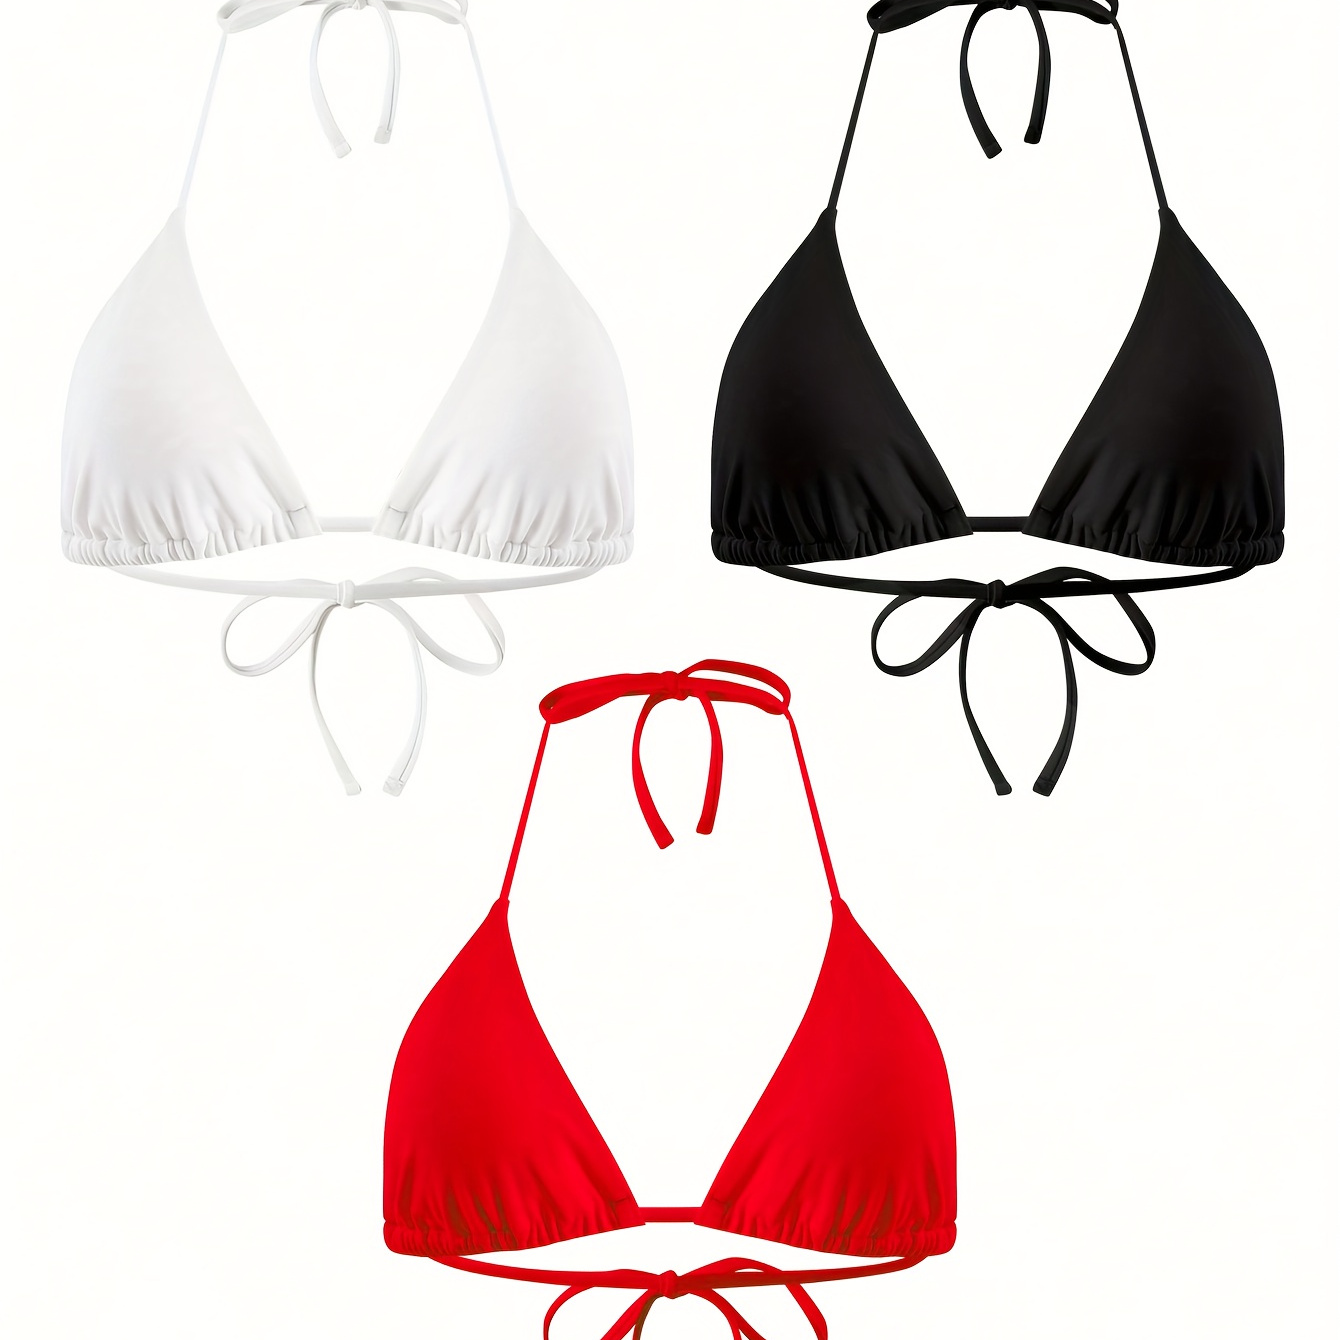 

3pcs Solid Color Bikini Tops, Halter Neck Tie Back Backless Triangle Swimming Top Bras, Women's Swimwear & Clothing